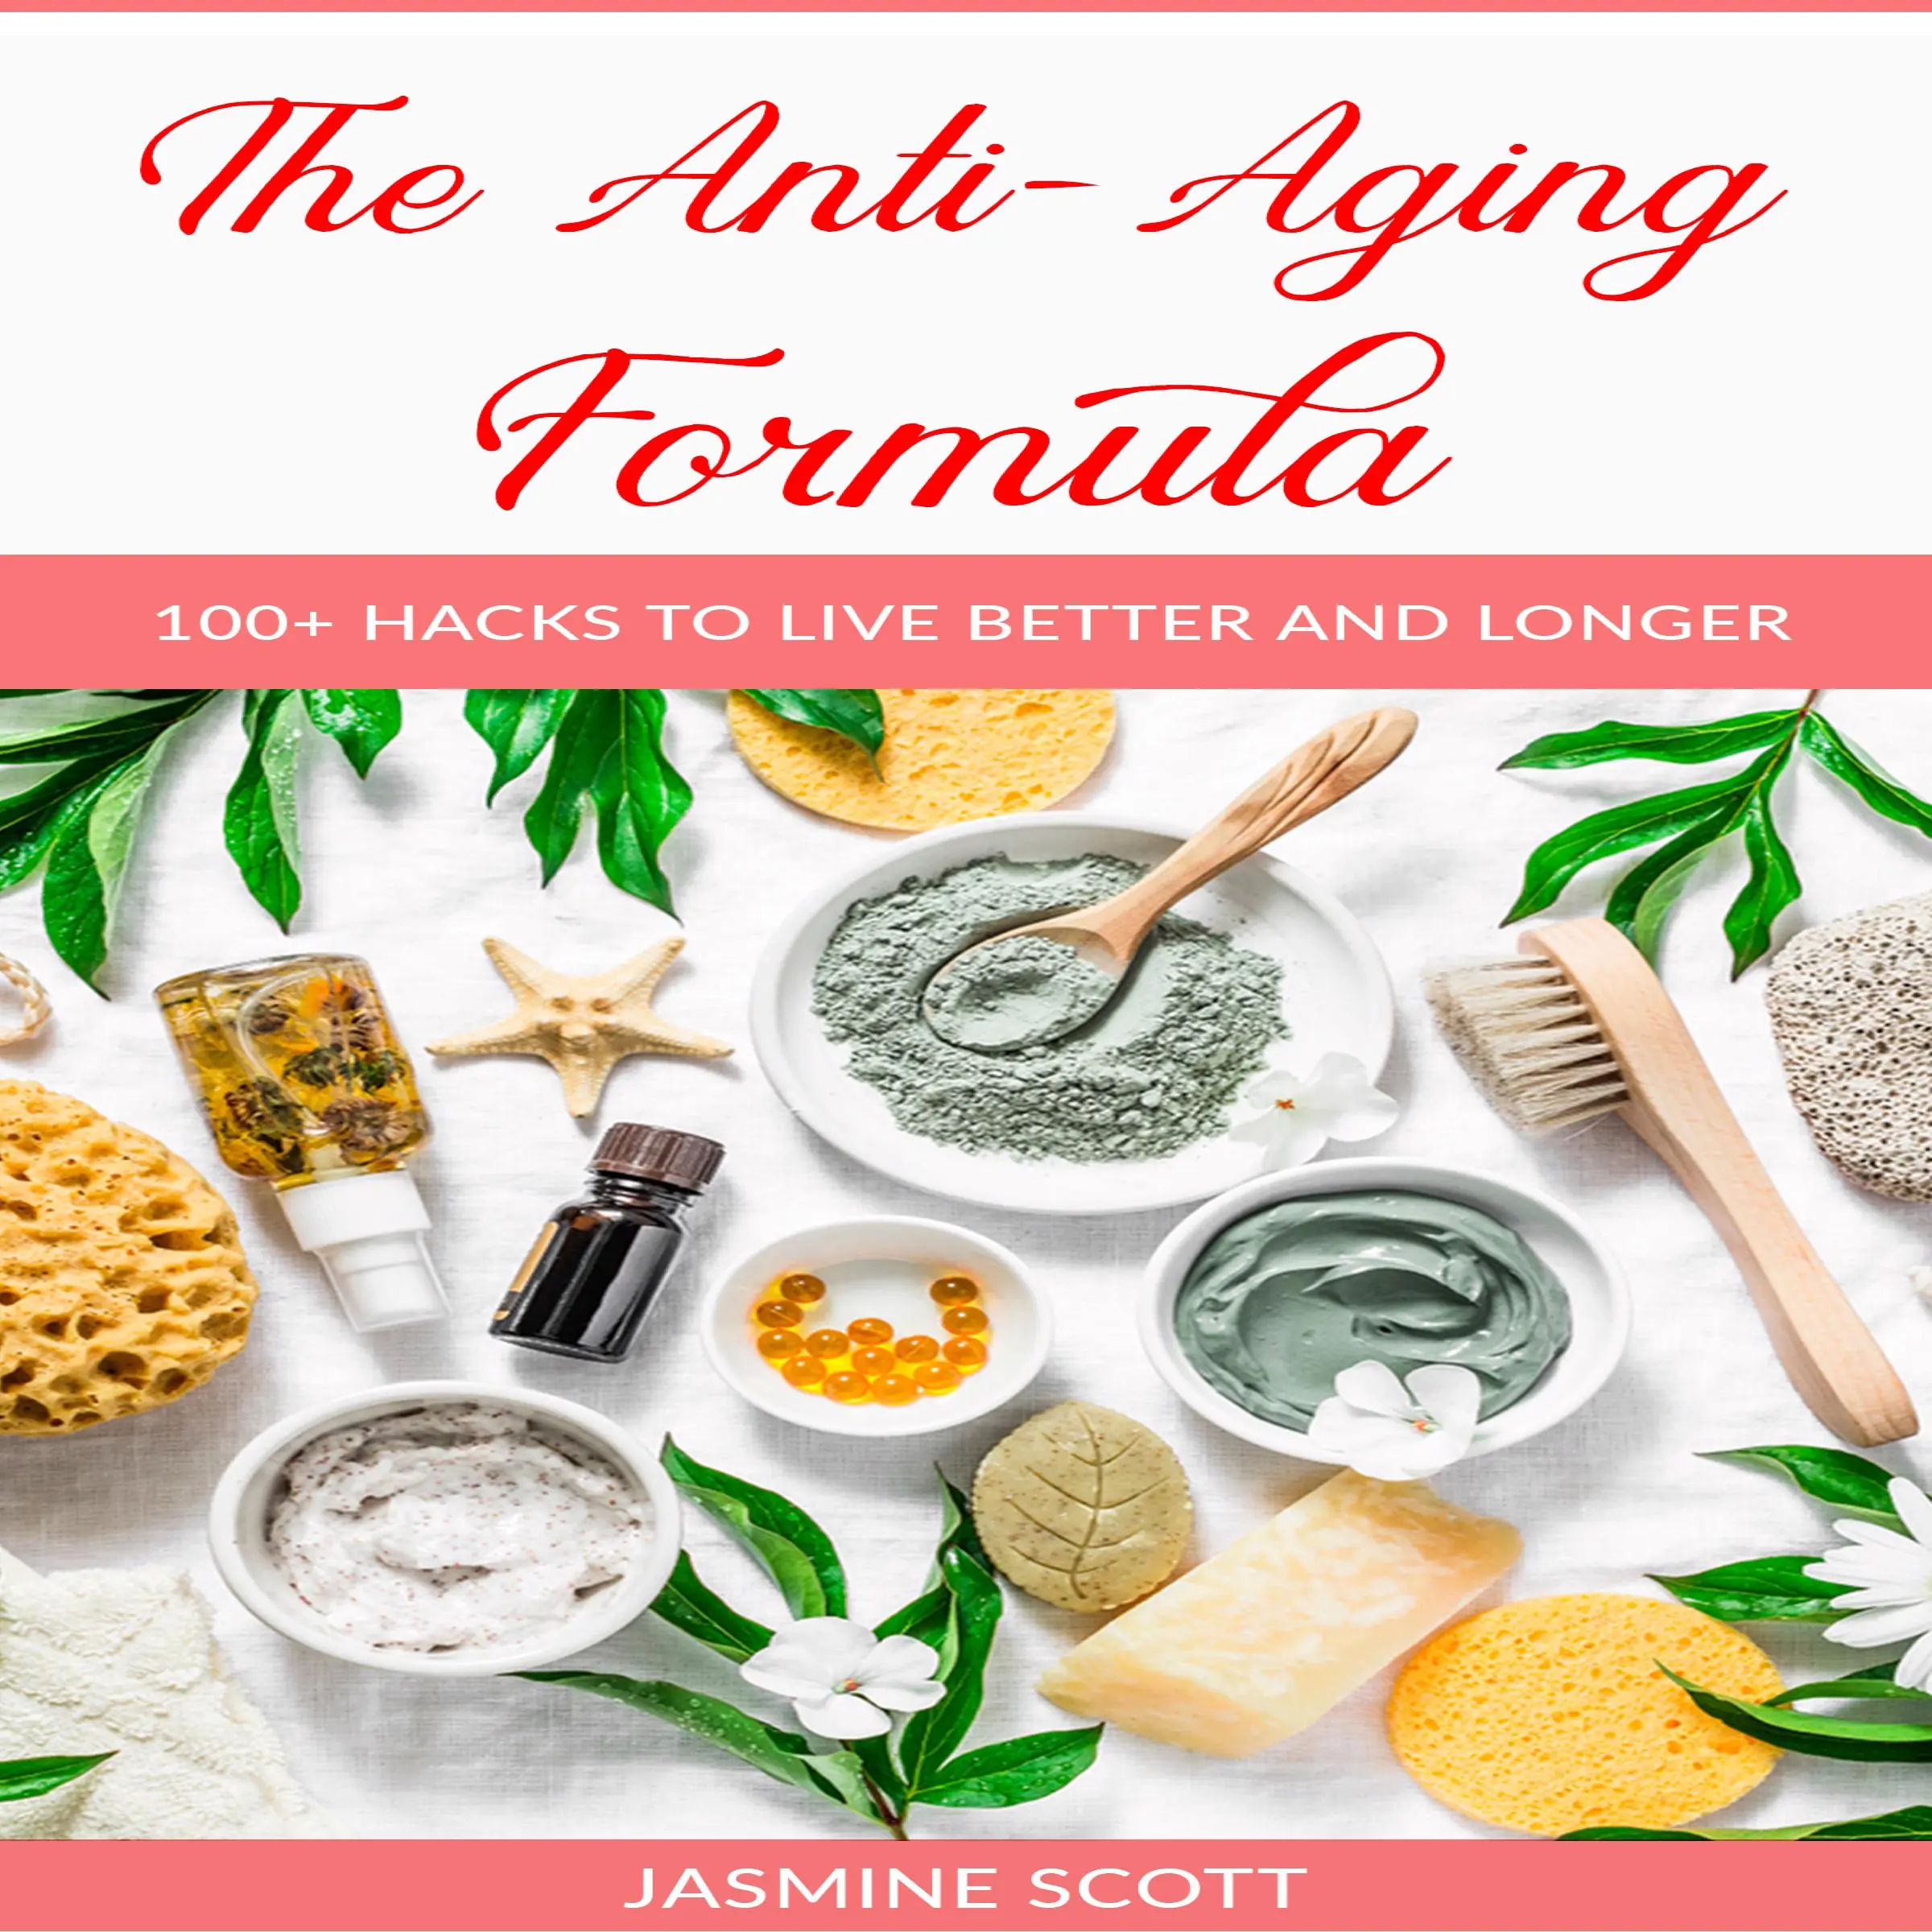 The Anti-Aging Formula: 100+ Hacks to Live Better and Longer Audiobook by Jasmine Scott